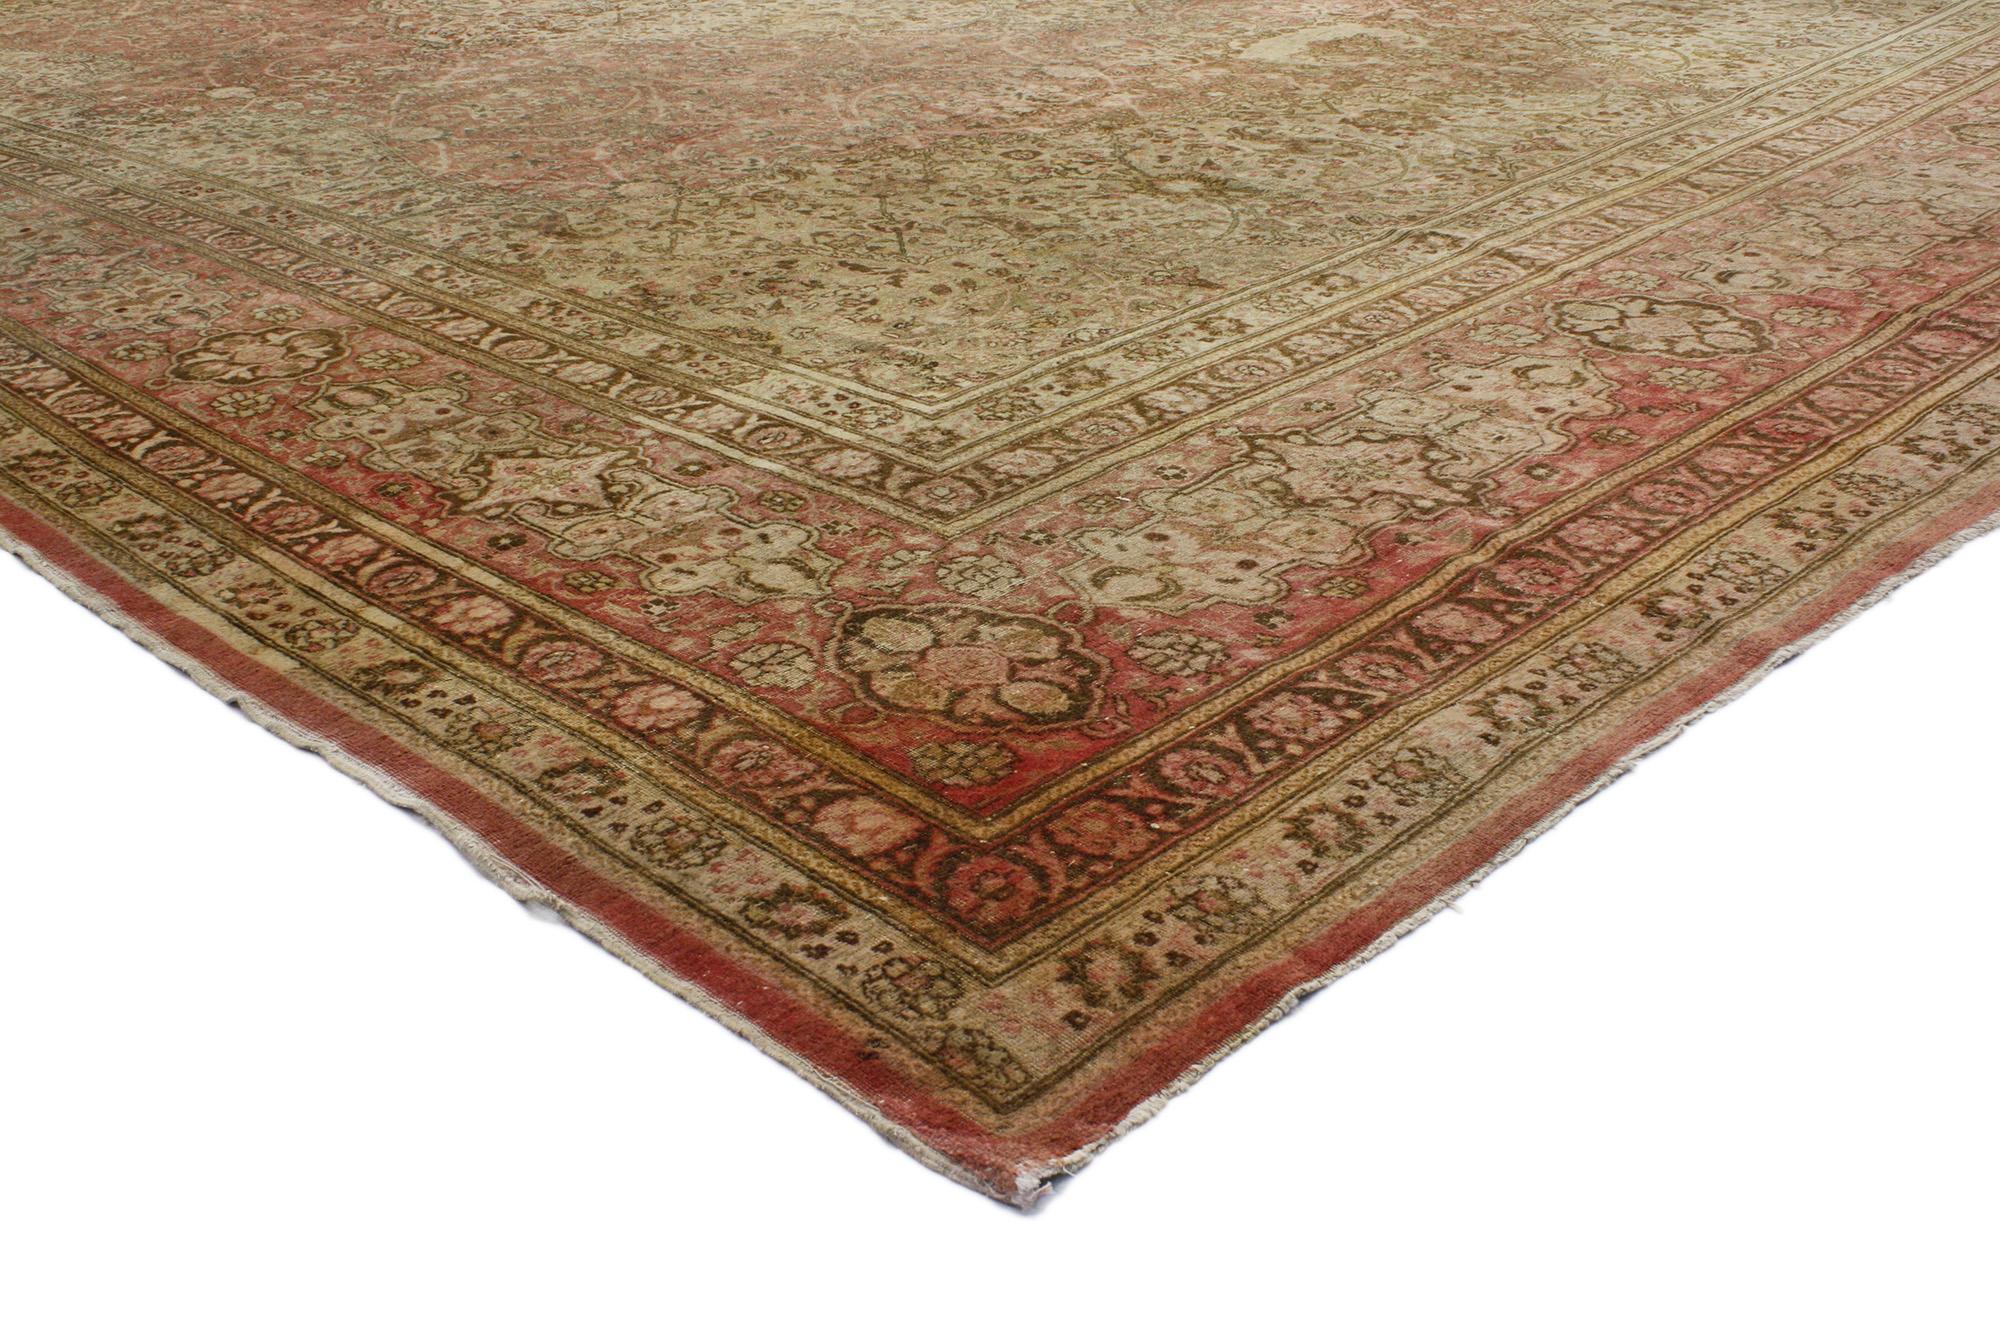 76770 Haji Kahlili Antique Persian Tabriz Rug, 15'04 x 20'07.
Emanating timeless style with incredible detail and texture, this oversized antique Persian Tabriz rug is a captivating vision of woven beauty. The intricate botanical elements and earthy